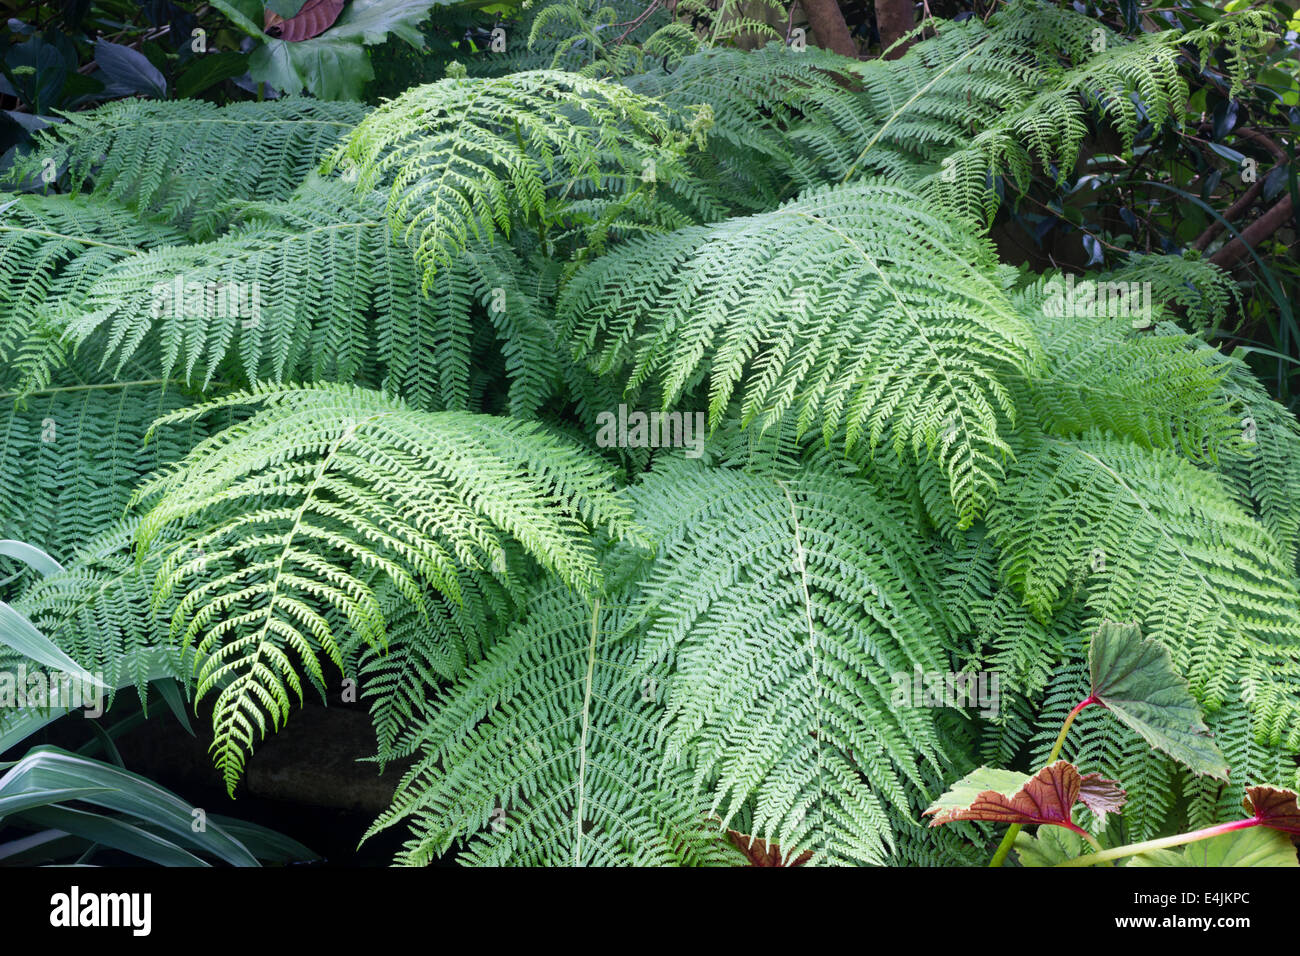 Arching fronds of the lady fern, Athyrium filix-femina, in a Plymouth garden Stock Photo